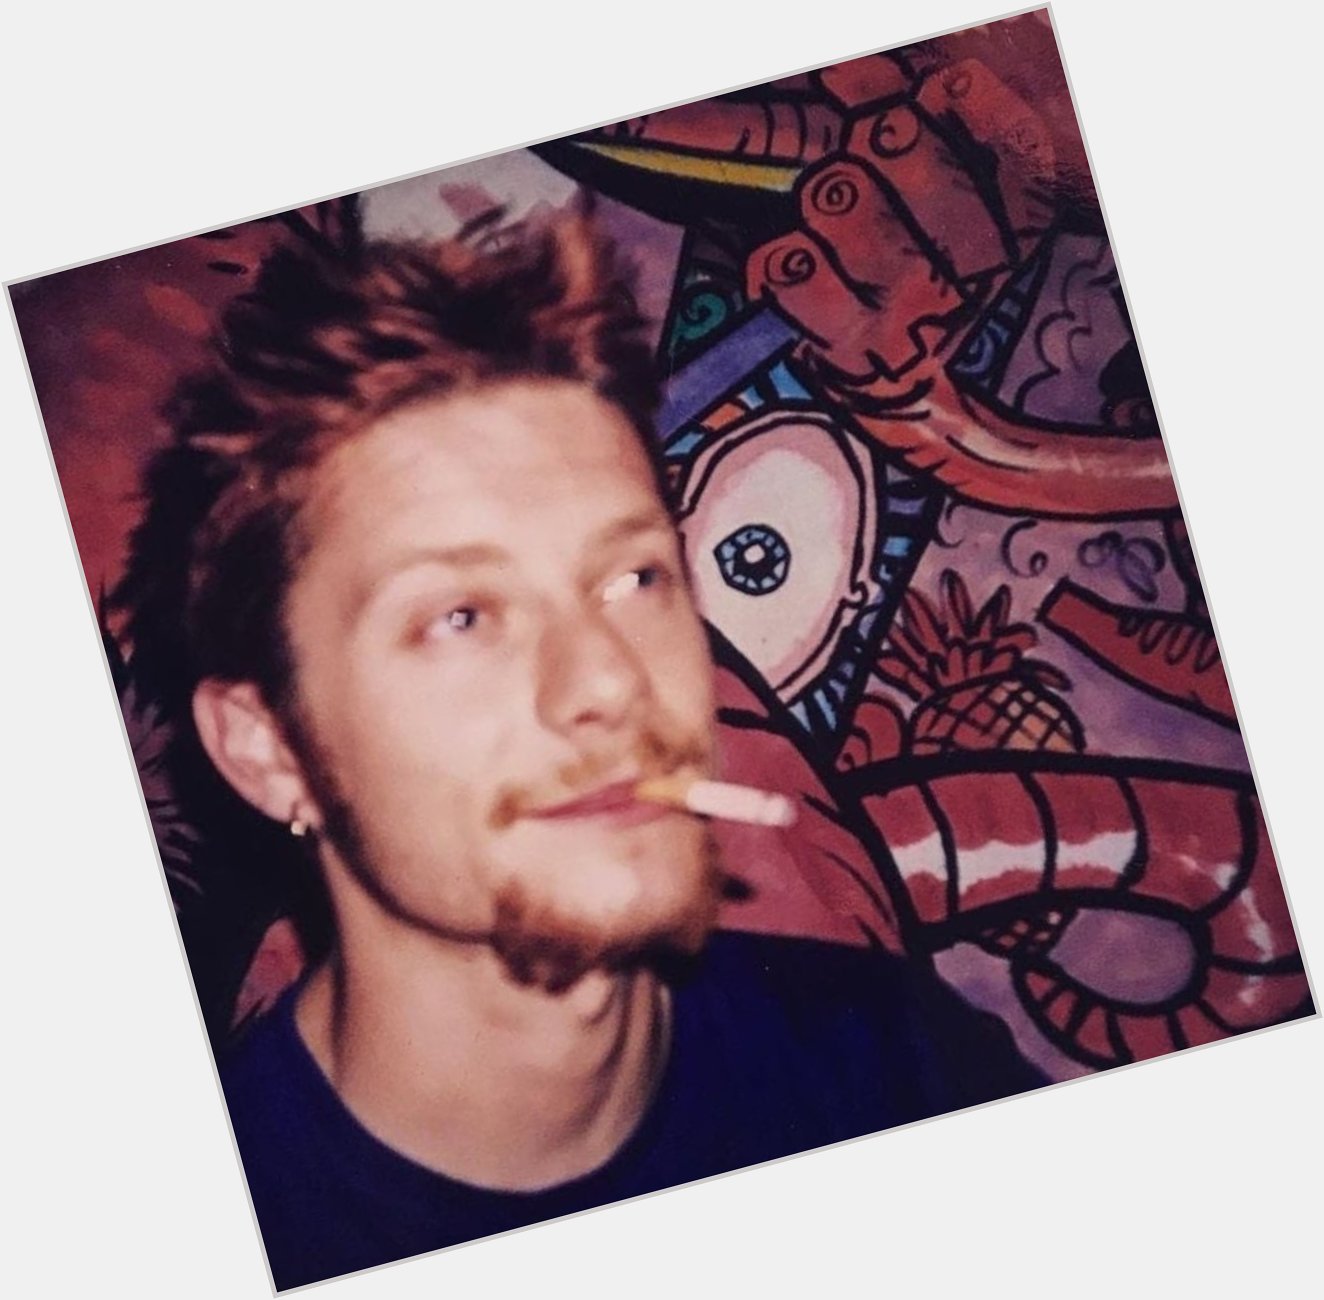 Happy birthday to jamie hewlett!!!! one of the talented dads of the monkey band <3 